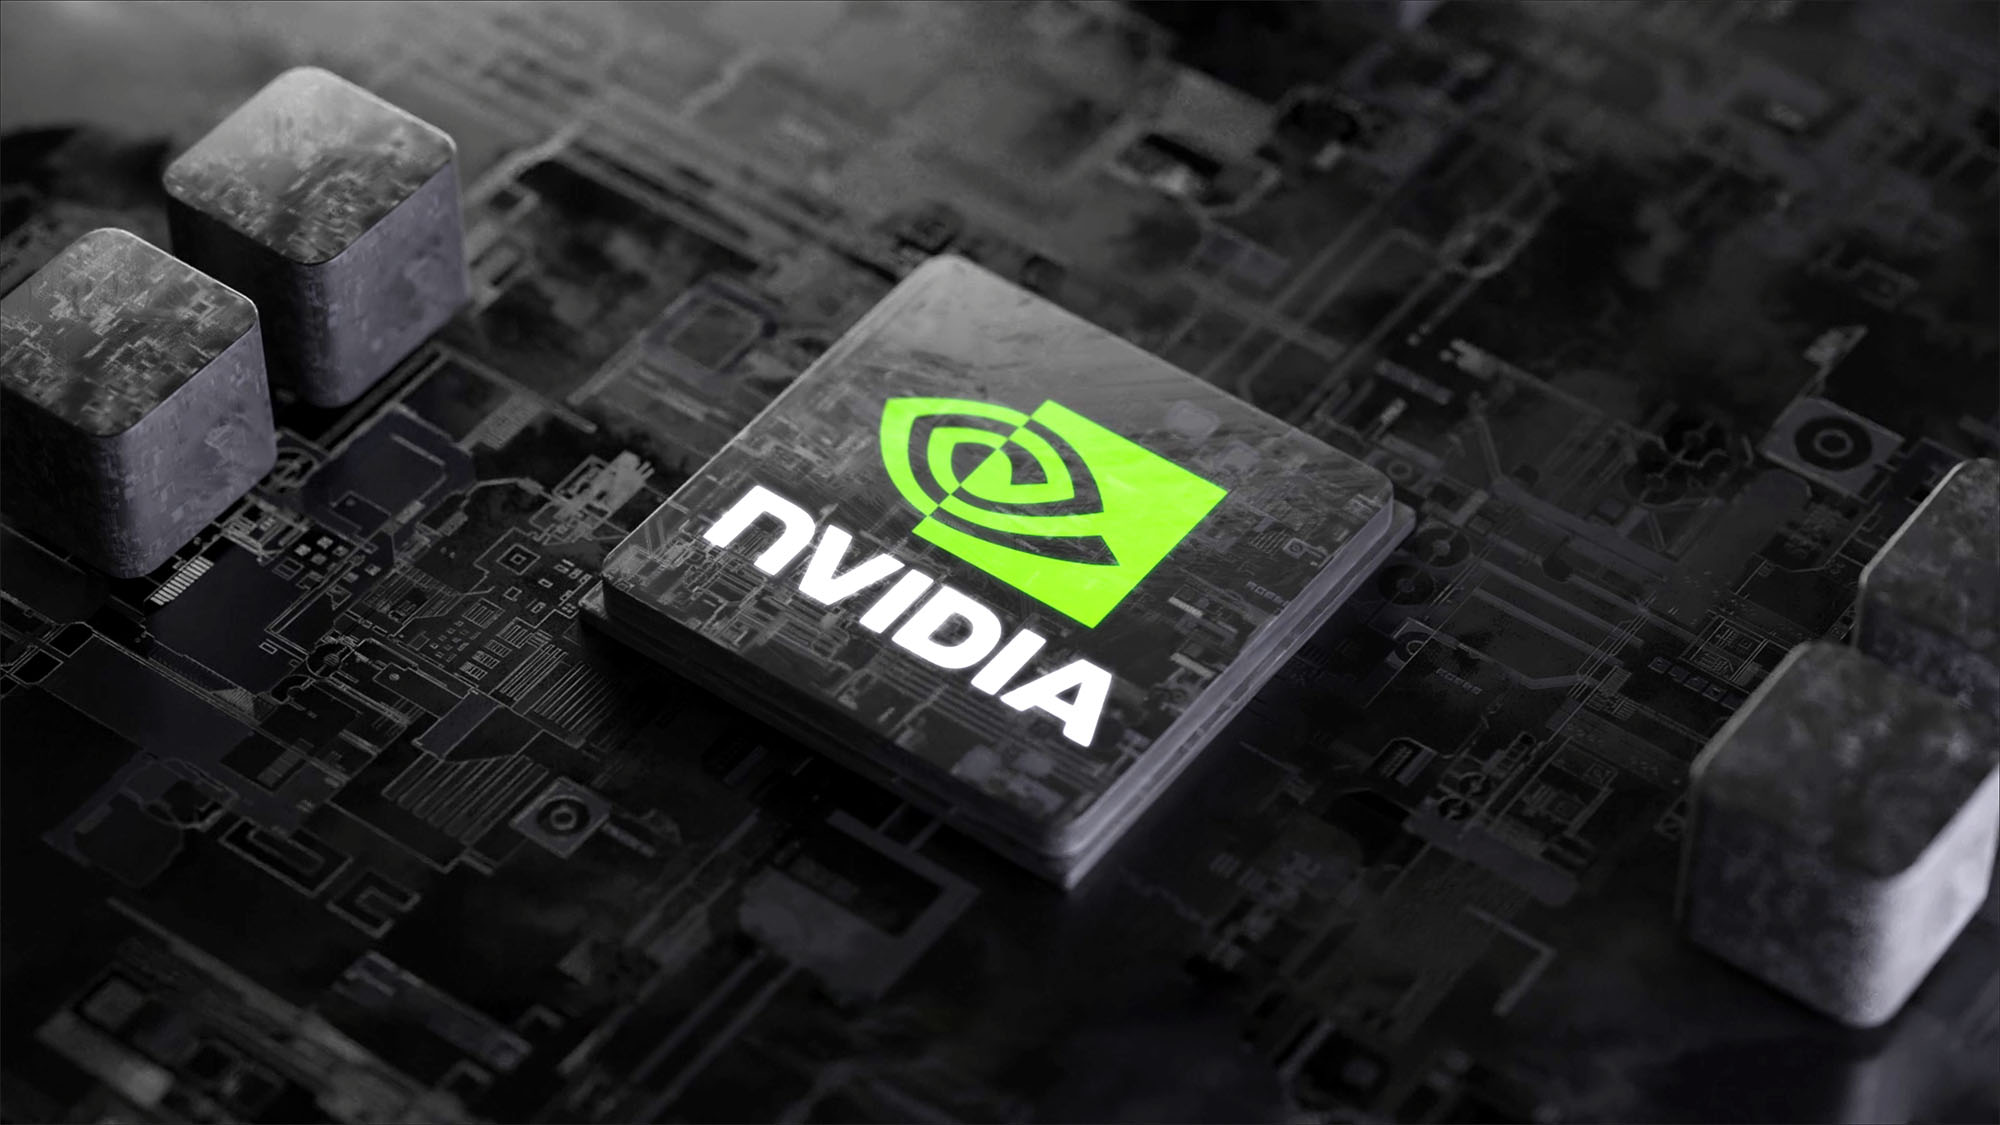 Intel’s stock experiences a decline following reports of Nvidia’s development of an Arm-based PC chip.